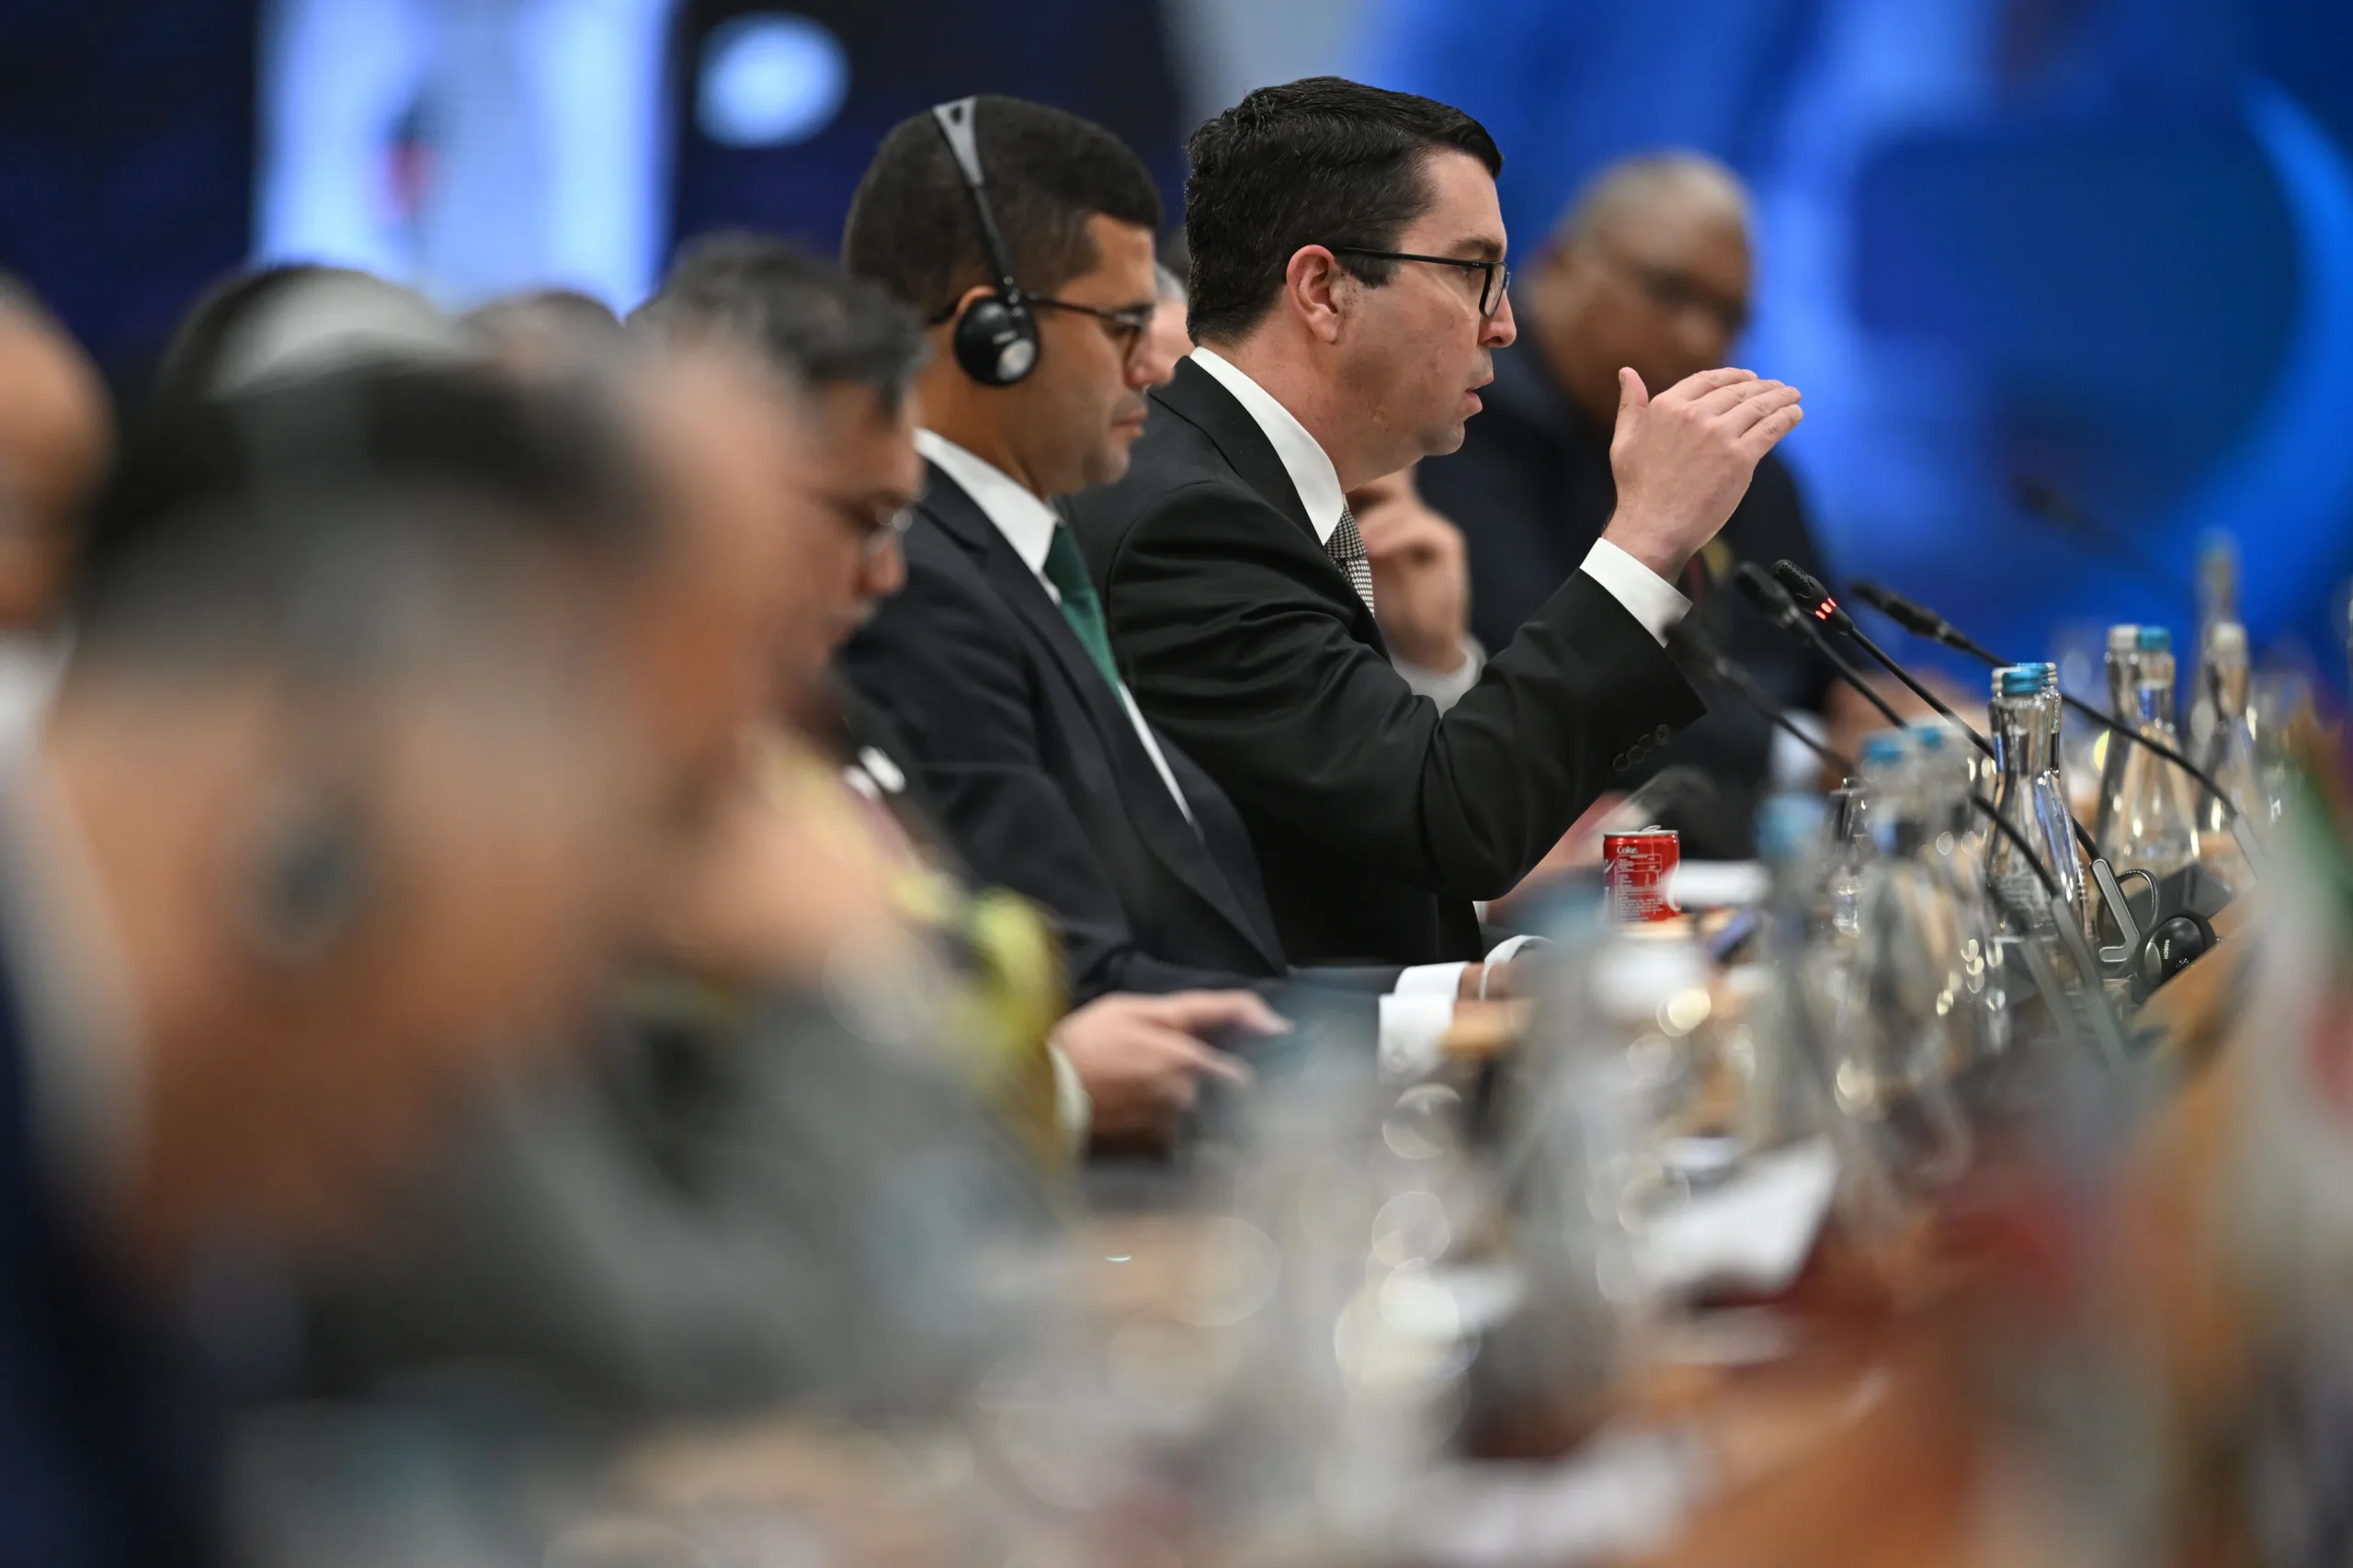 Assistant Minister to the Prime Minister Hon Patrick Gorman MP (right) delivered remarks during the High Level Meeting of the 10th World Water Forum 2024 in Nusa Dua, Badung, Bali/Media Center of World Water Forum 2024/Aditya Pradana Putra/pras/mif